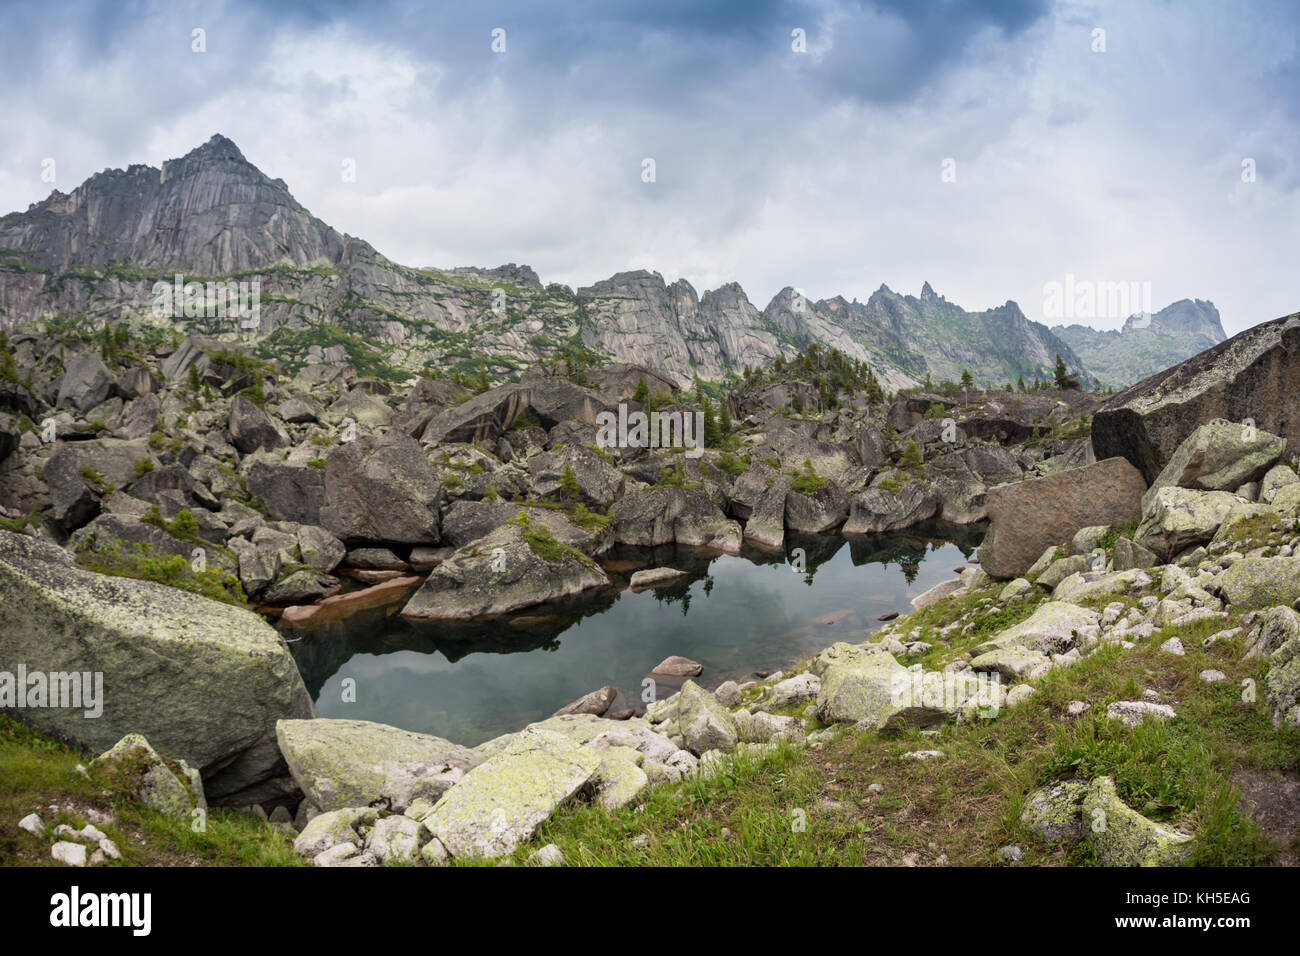 Mirror reflections in Lake Harmony in the high mountains of Ergaki, Russia. Stock Photo